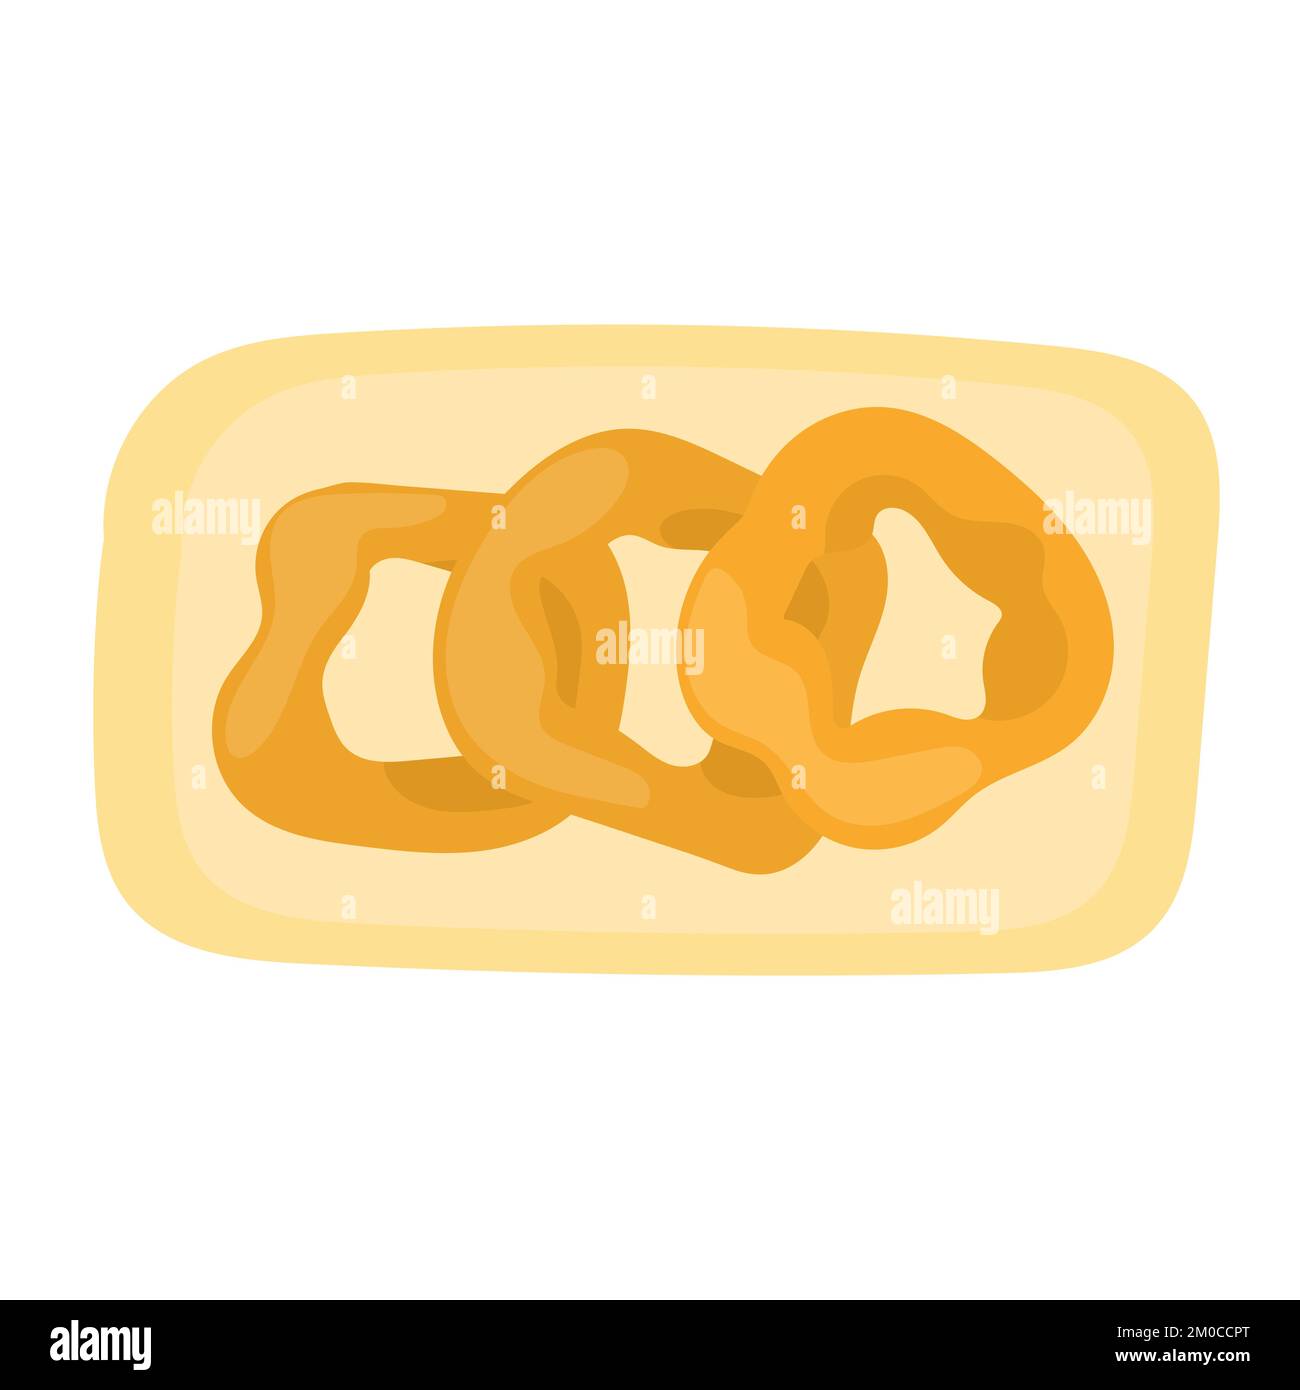 Picarones pumpkin donuts, dessert, latin american cuisine. Three donuts on a plate. National cuisine of Peru. Food illustration, vector Stock Vector